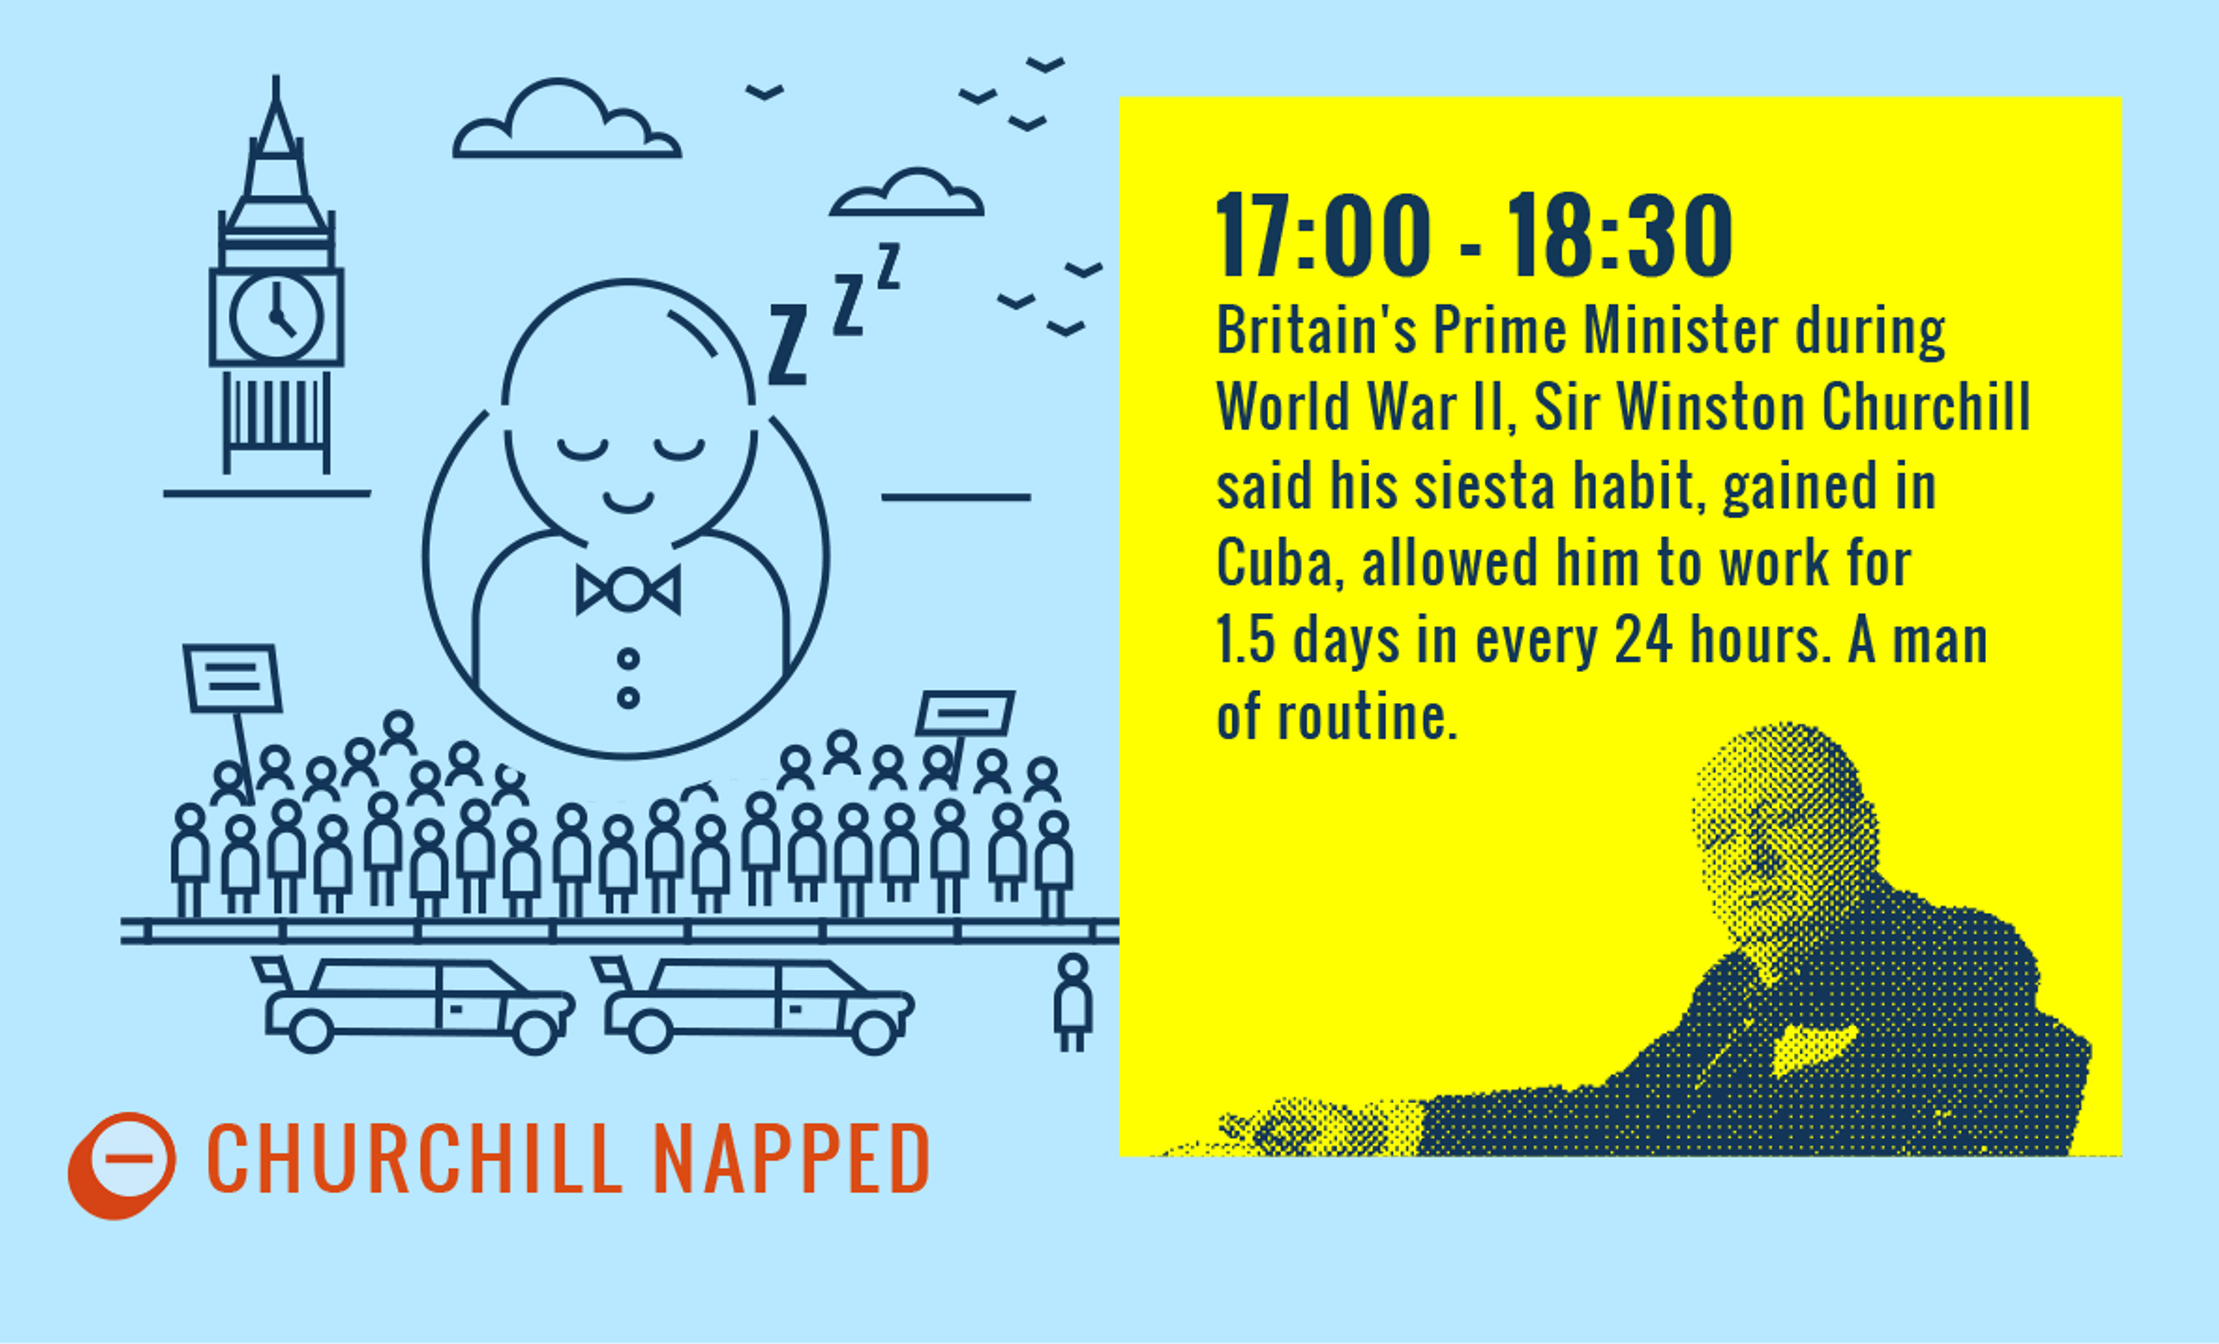 A fact box taken from the Time of Day website. Titled 'Churchill Napped' it explains how Winston Churchill used siesta's to 'work 1.5 days in every 24 hours'.